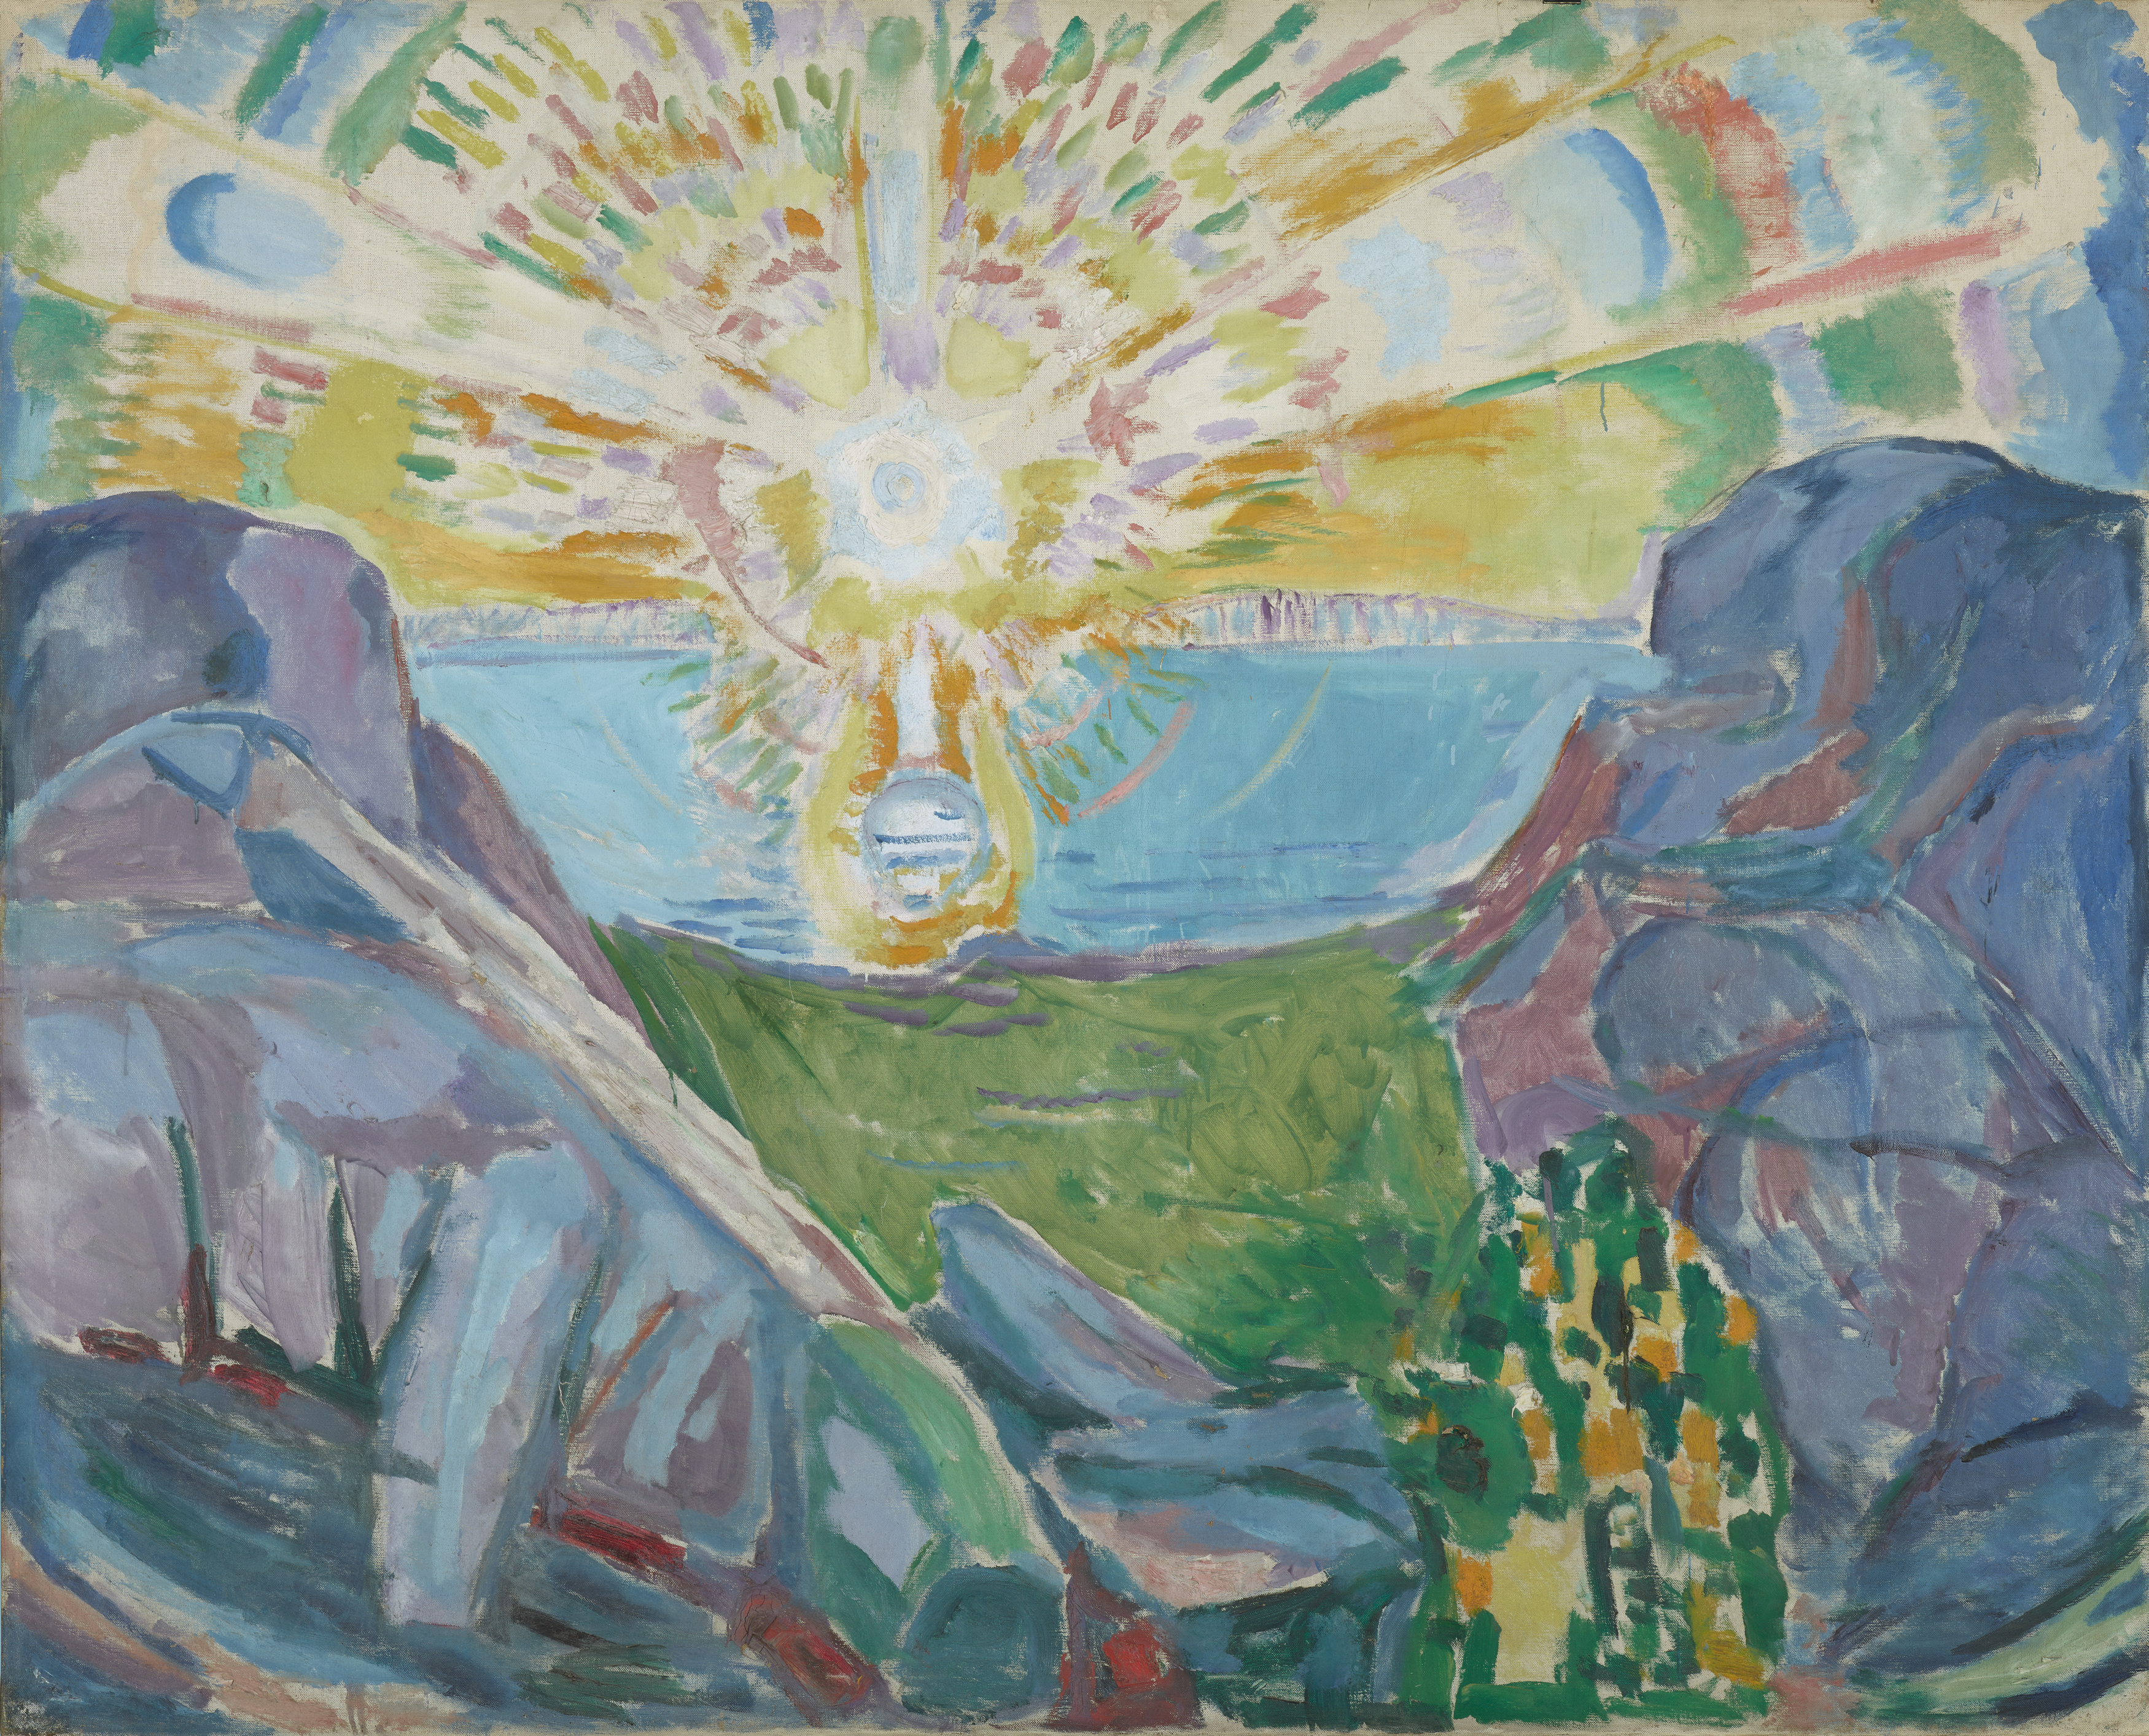 A magnificent painting of a sunrise over a fjord landscape. The sun’s rays flood towards you. The sky vibrates and sends blue-green waves across the fjord. 